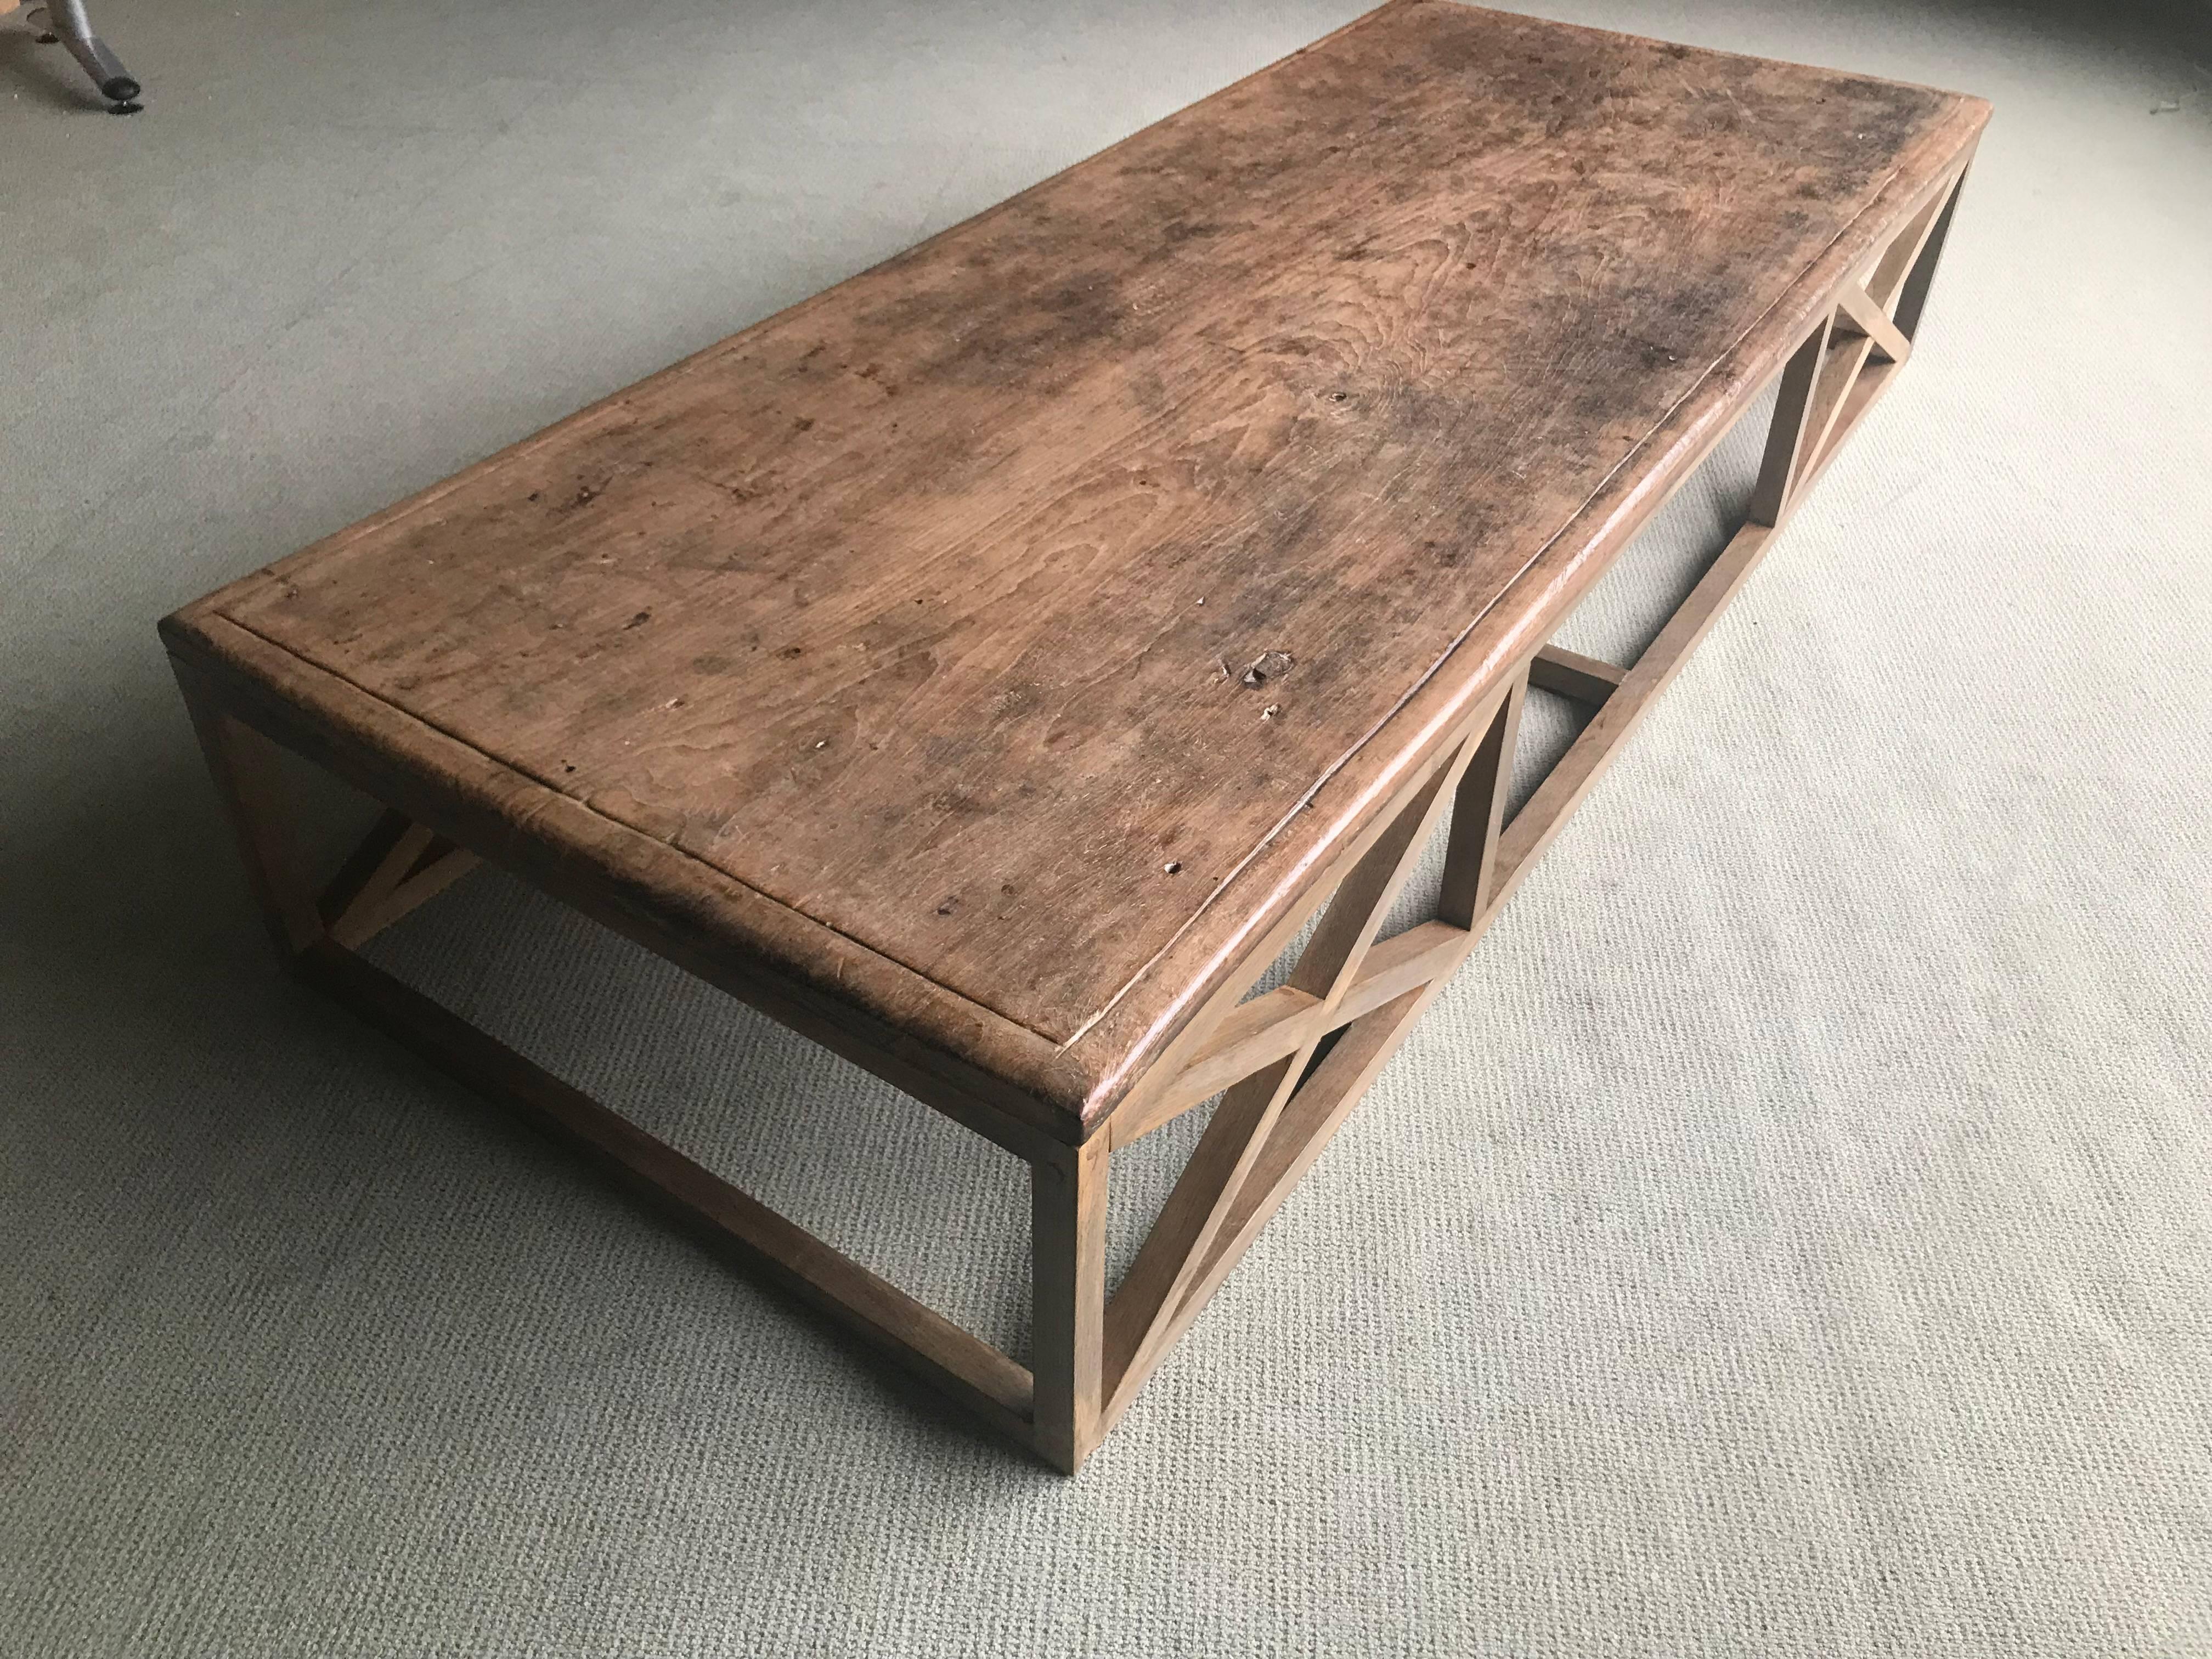 Coffeetable in teak wood with wooden base
Great patina and one piece wood top
which is quite exceptional.